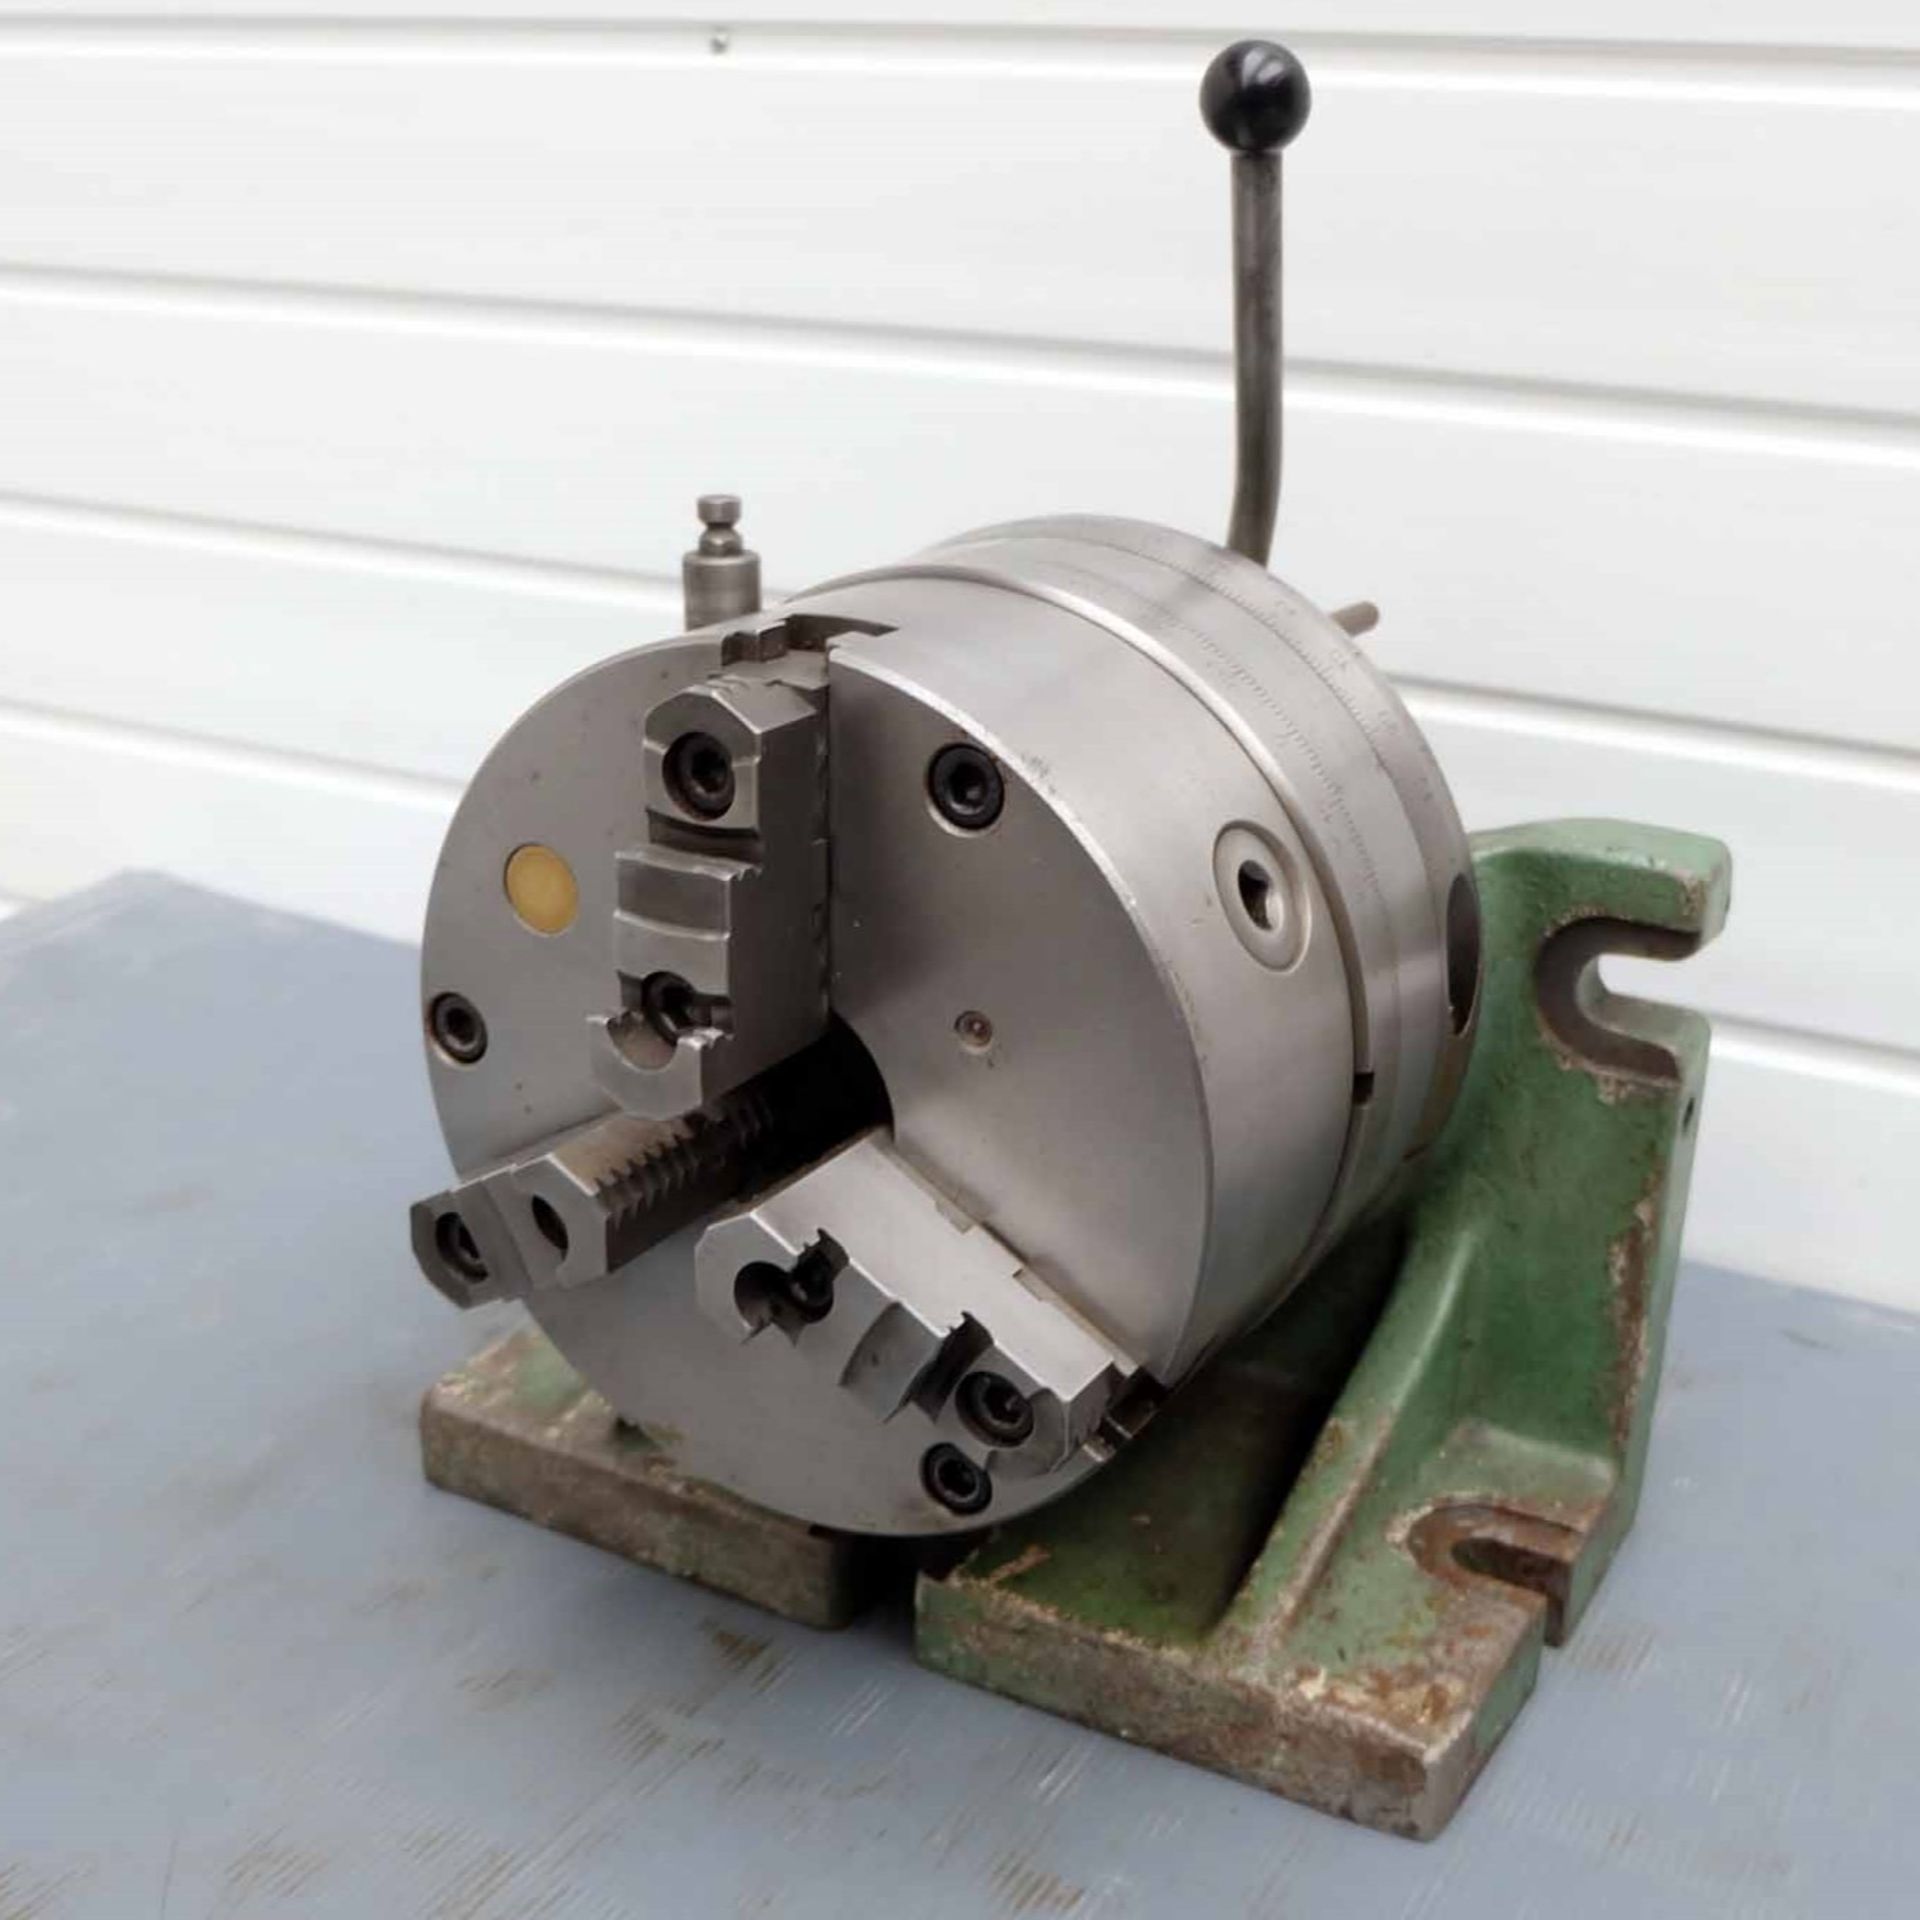 Horizontal / Vertical Indexing Head. With Bison 200mm Diameter 3 Jaw Chuck. - Image 3 of 6